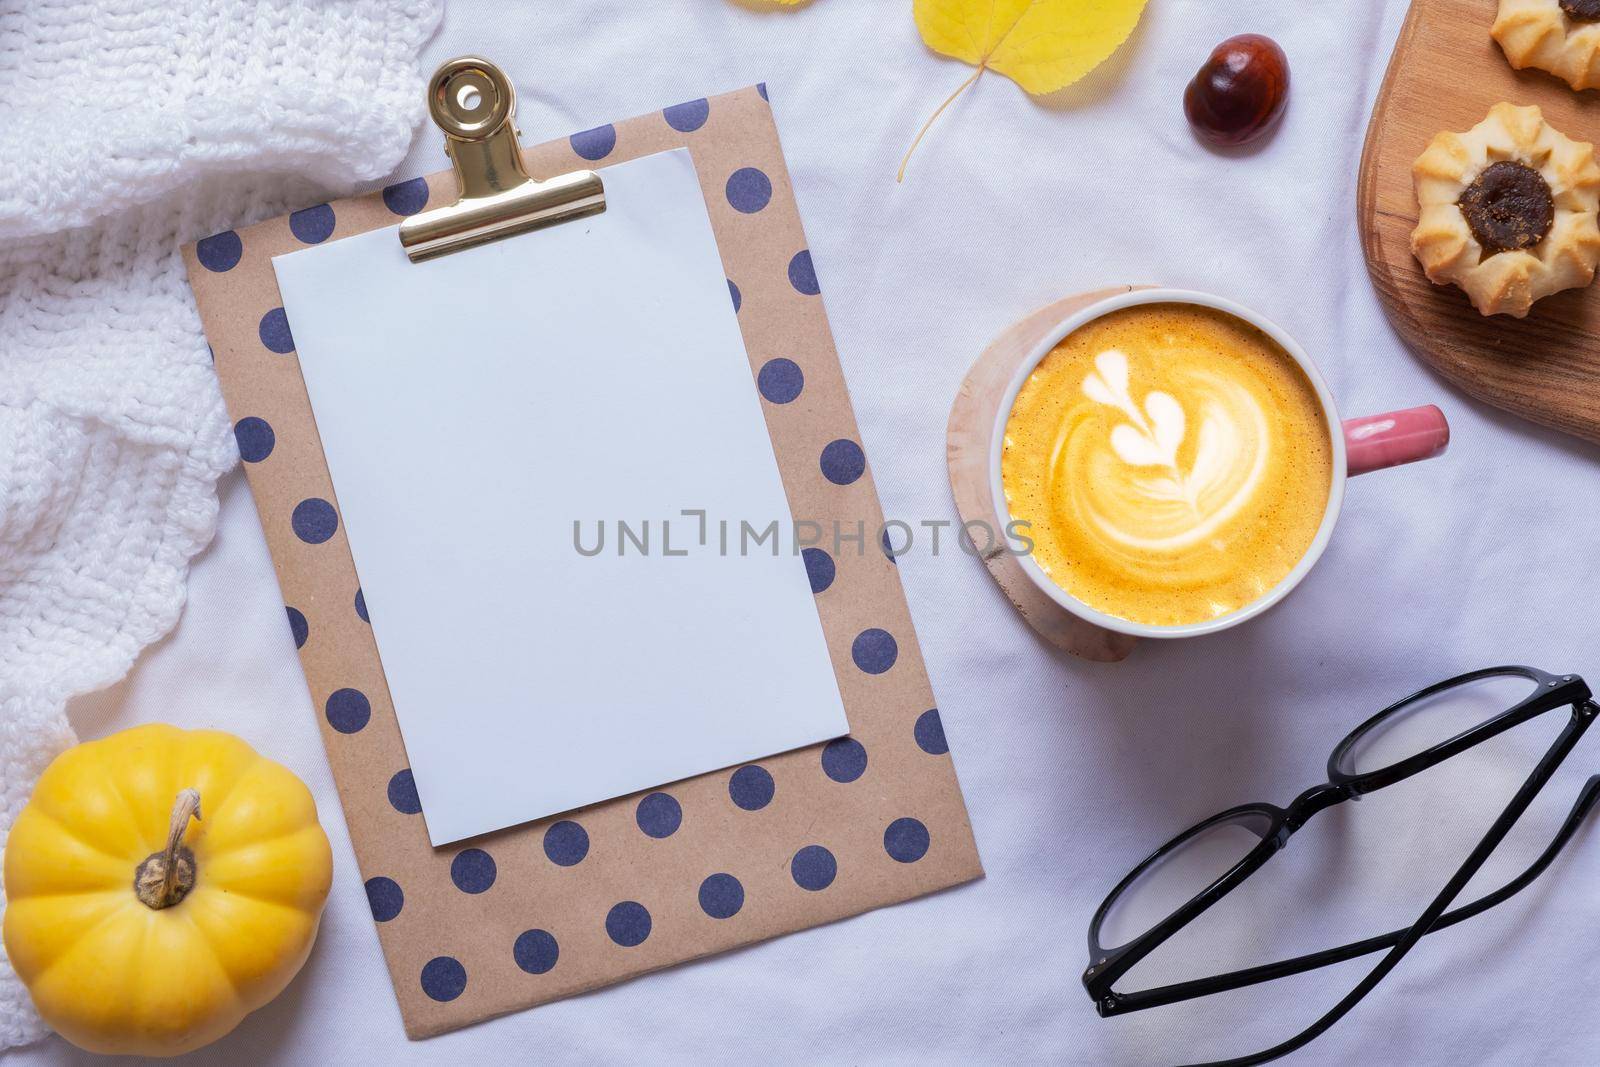 Blank sheet of paper and latte cup with autumn cozy decor top view. Copy space for autumn text by ssvimaliss